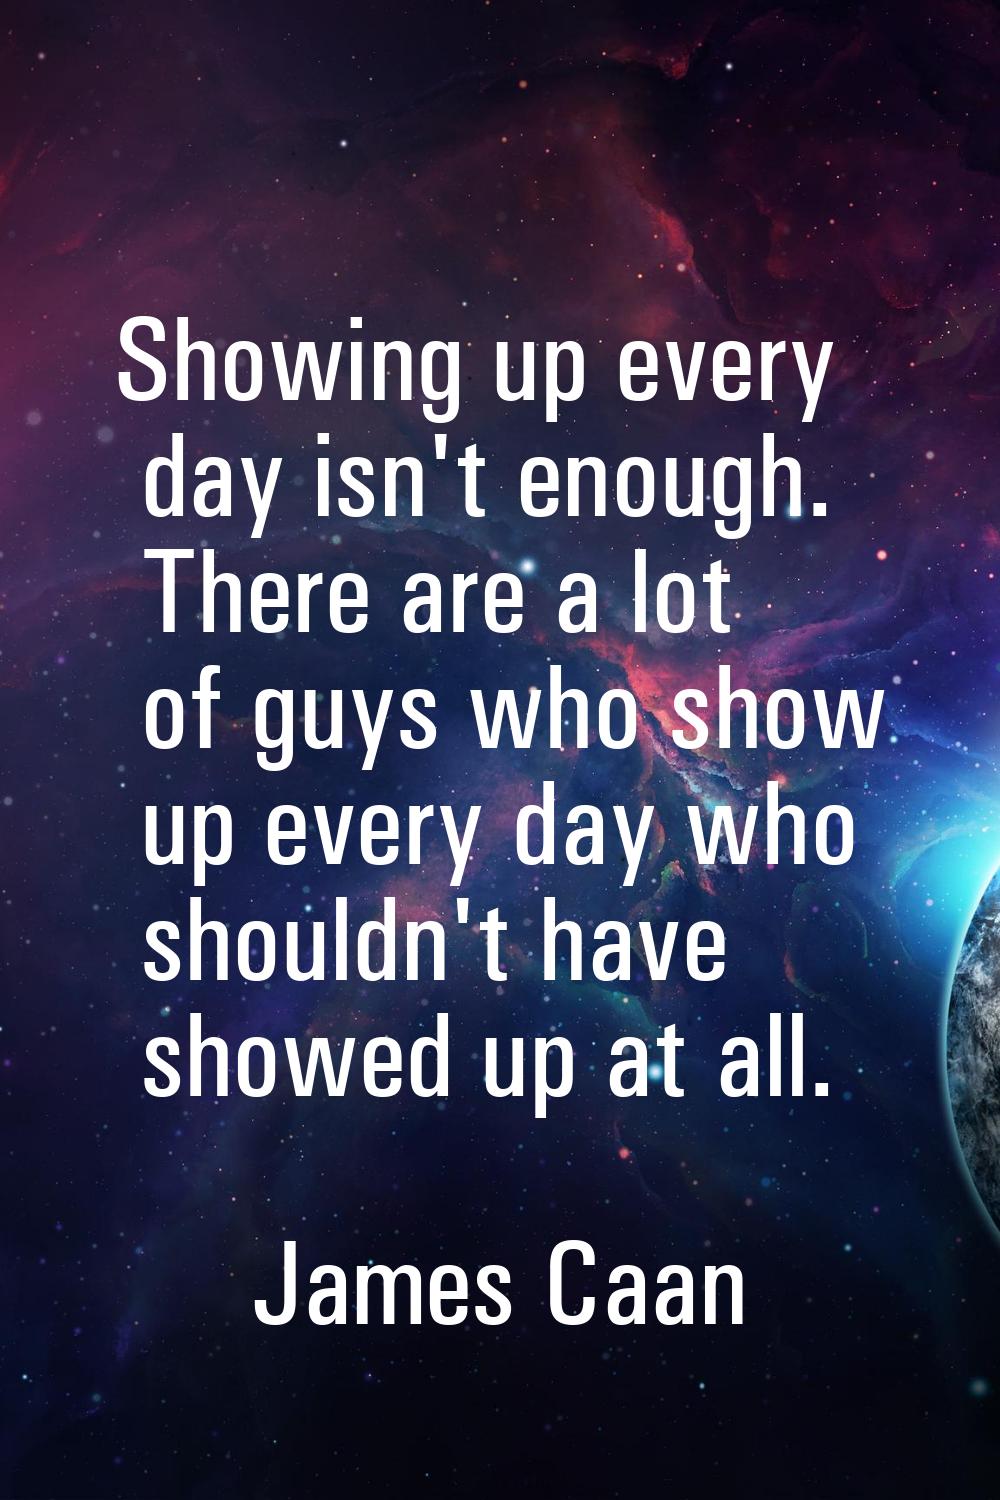 Showing up every day isn't enough. There are a lot of guys who show up every day who shouldn't have